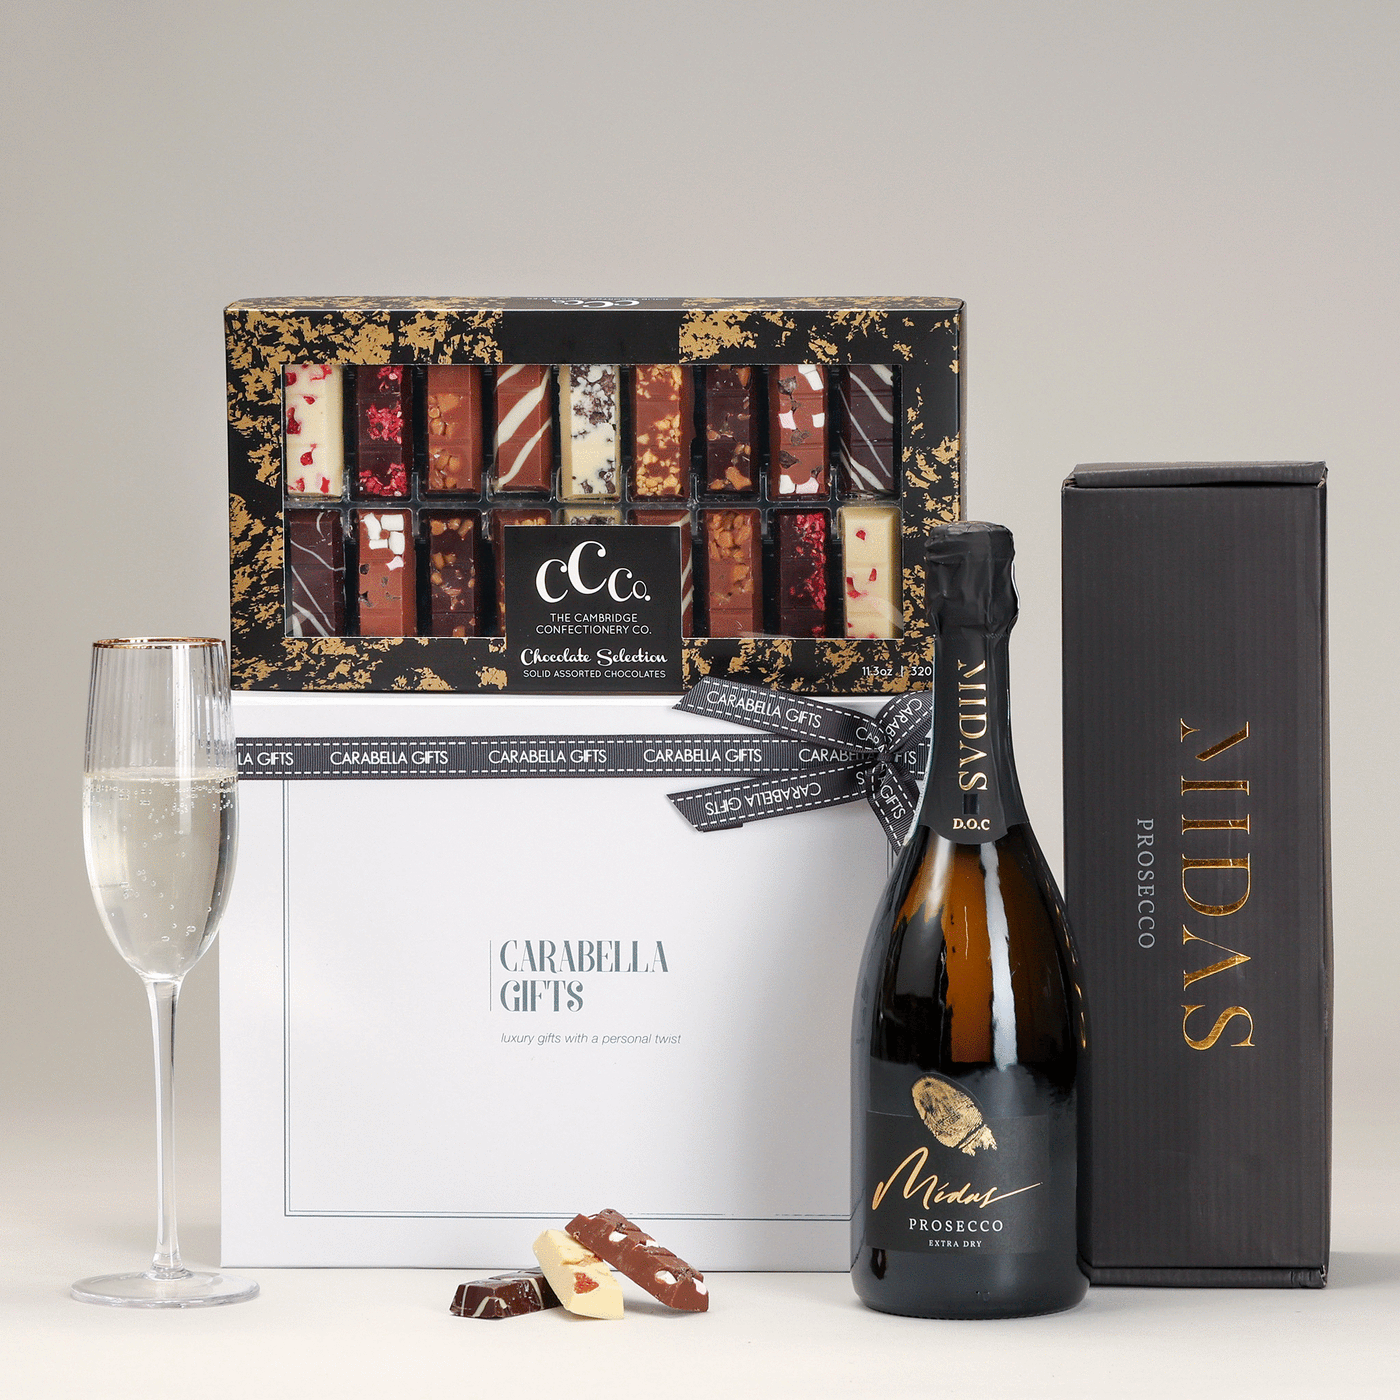 Luxury prosecco and truffles presented in a beautiful gift box and ribbon